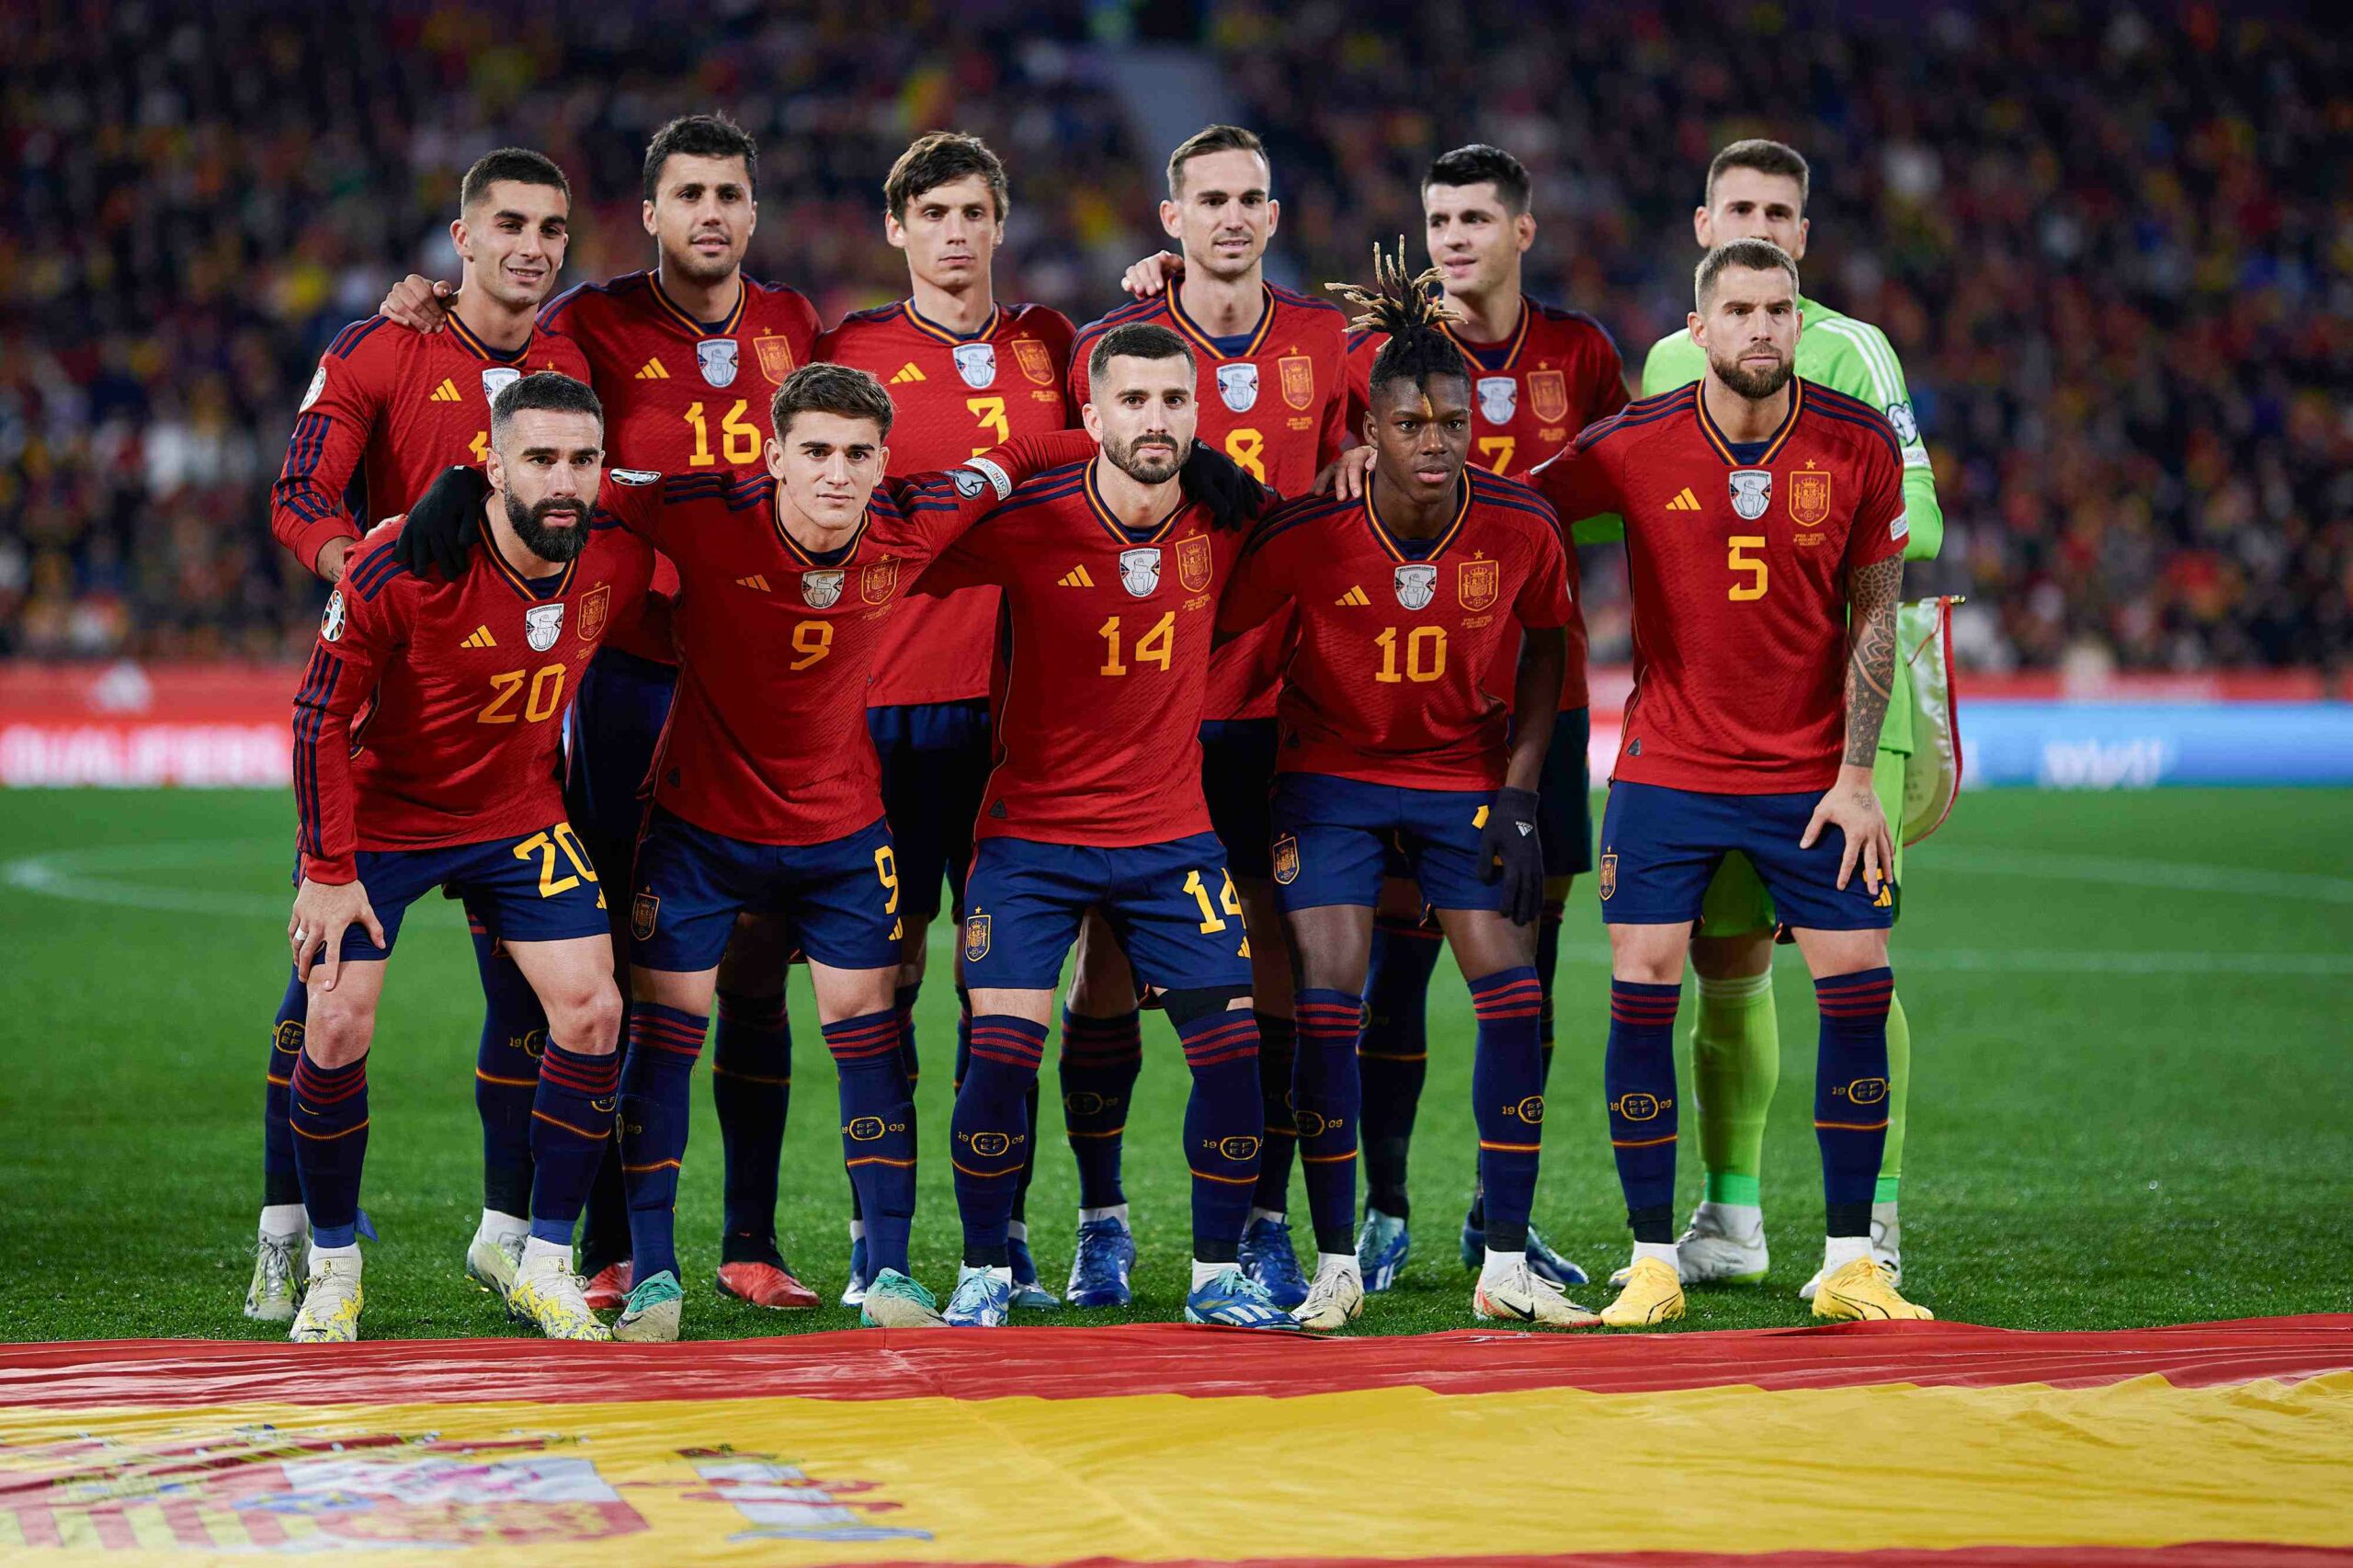 The Spanish national football team, dressed in their iconic red and gold uniforms, poses for a group photo on the pitch before the start of their Euro 2024 qualification game, exuding a blend of determination and camaraderie.